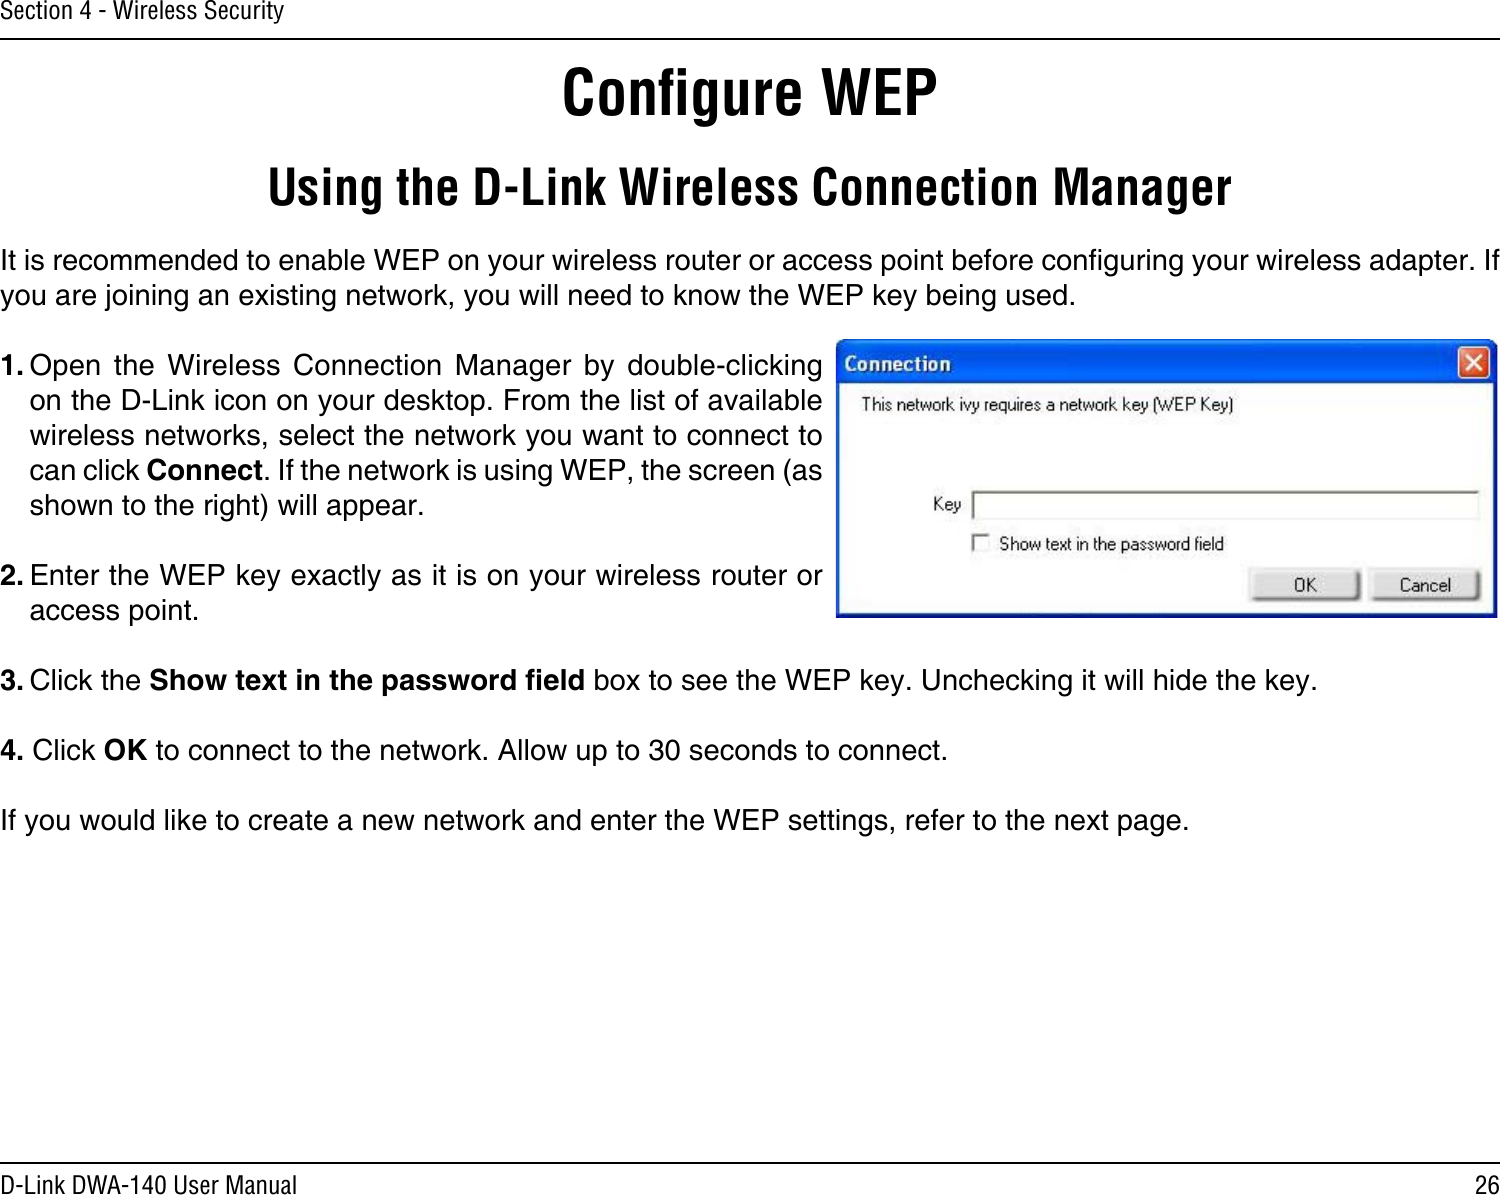 26D-Link DWA-140 User ManualSection 4 - Wireless SecurityConﬁgure WEPUsing the D-Link Wireless Connection ManagerIt is recommended to enable WEP on your wireless router or access point before conguring your wireless adapter. If you are joining an existing network, you will need to know the WEP key being used.1. Open  the  Wireless  Connection  Manager  by  double-clicking on the D-Link icon on your desktop. From the list of available wireless networks, select the network you want to connect to can click Connect. If the network is using WEP, the screen (as shown to the right) will appear. 2. Enter the WEP key exactly as it is on your wireless router or access point.3. Click the Show text in the password eld box to see the WEP key. Unchecking it will hide the key.4. Click OK to connect to the network. Allow up to 30 seconds to connect. If you would like to create a new network and enter the WEP settings, refer to the next page.